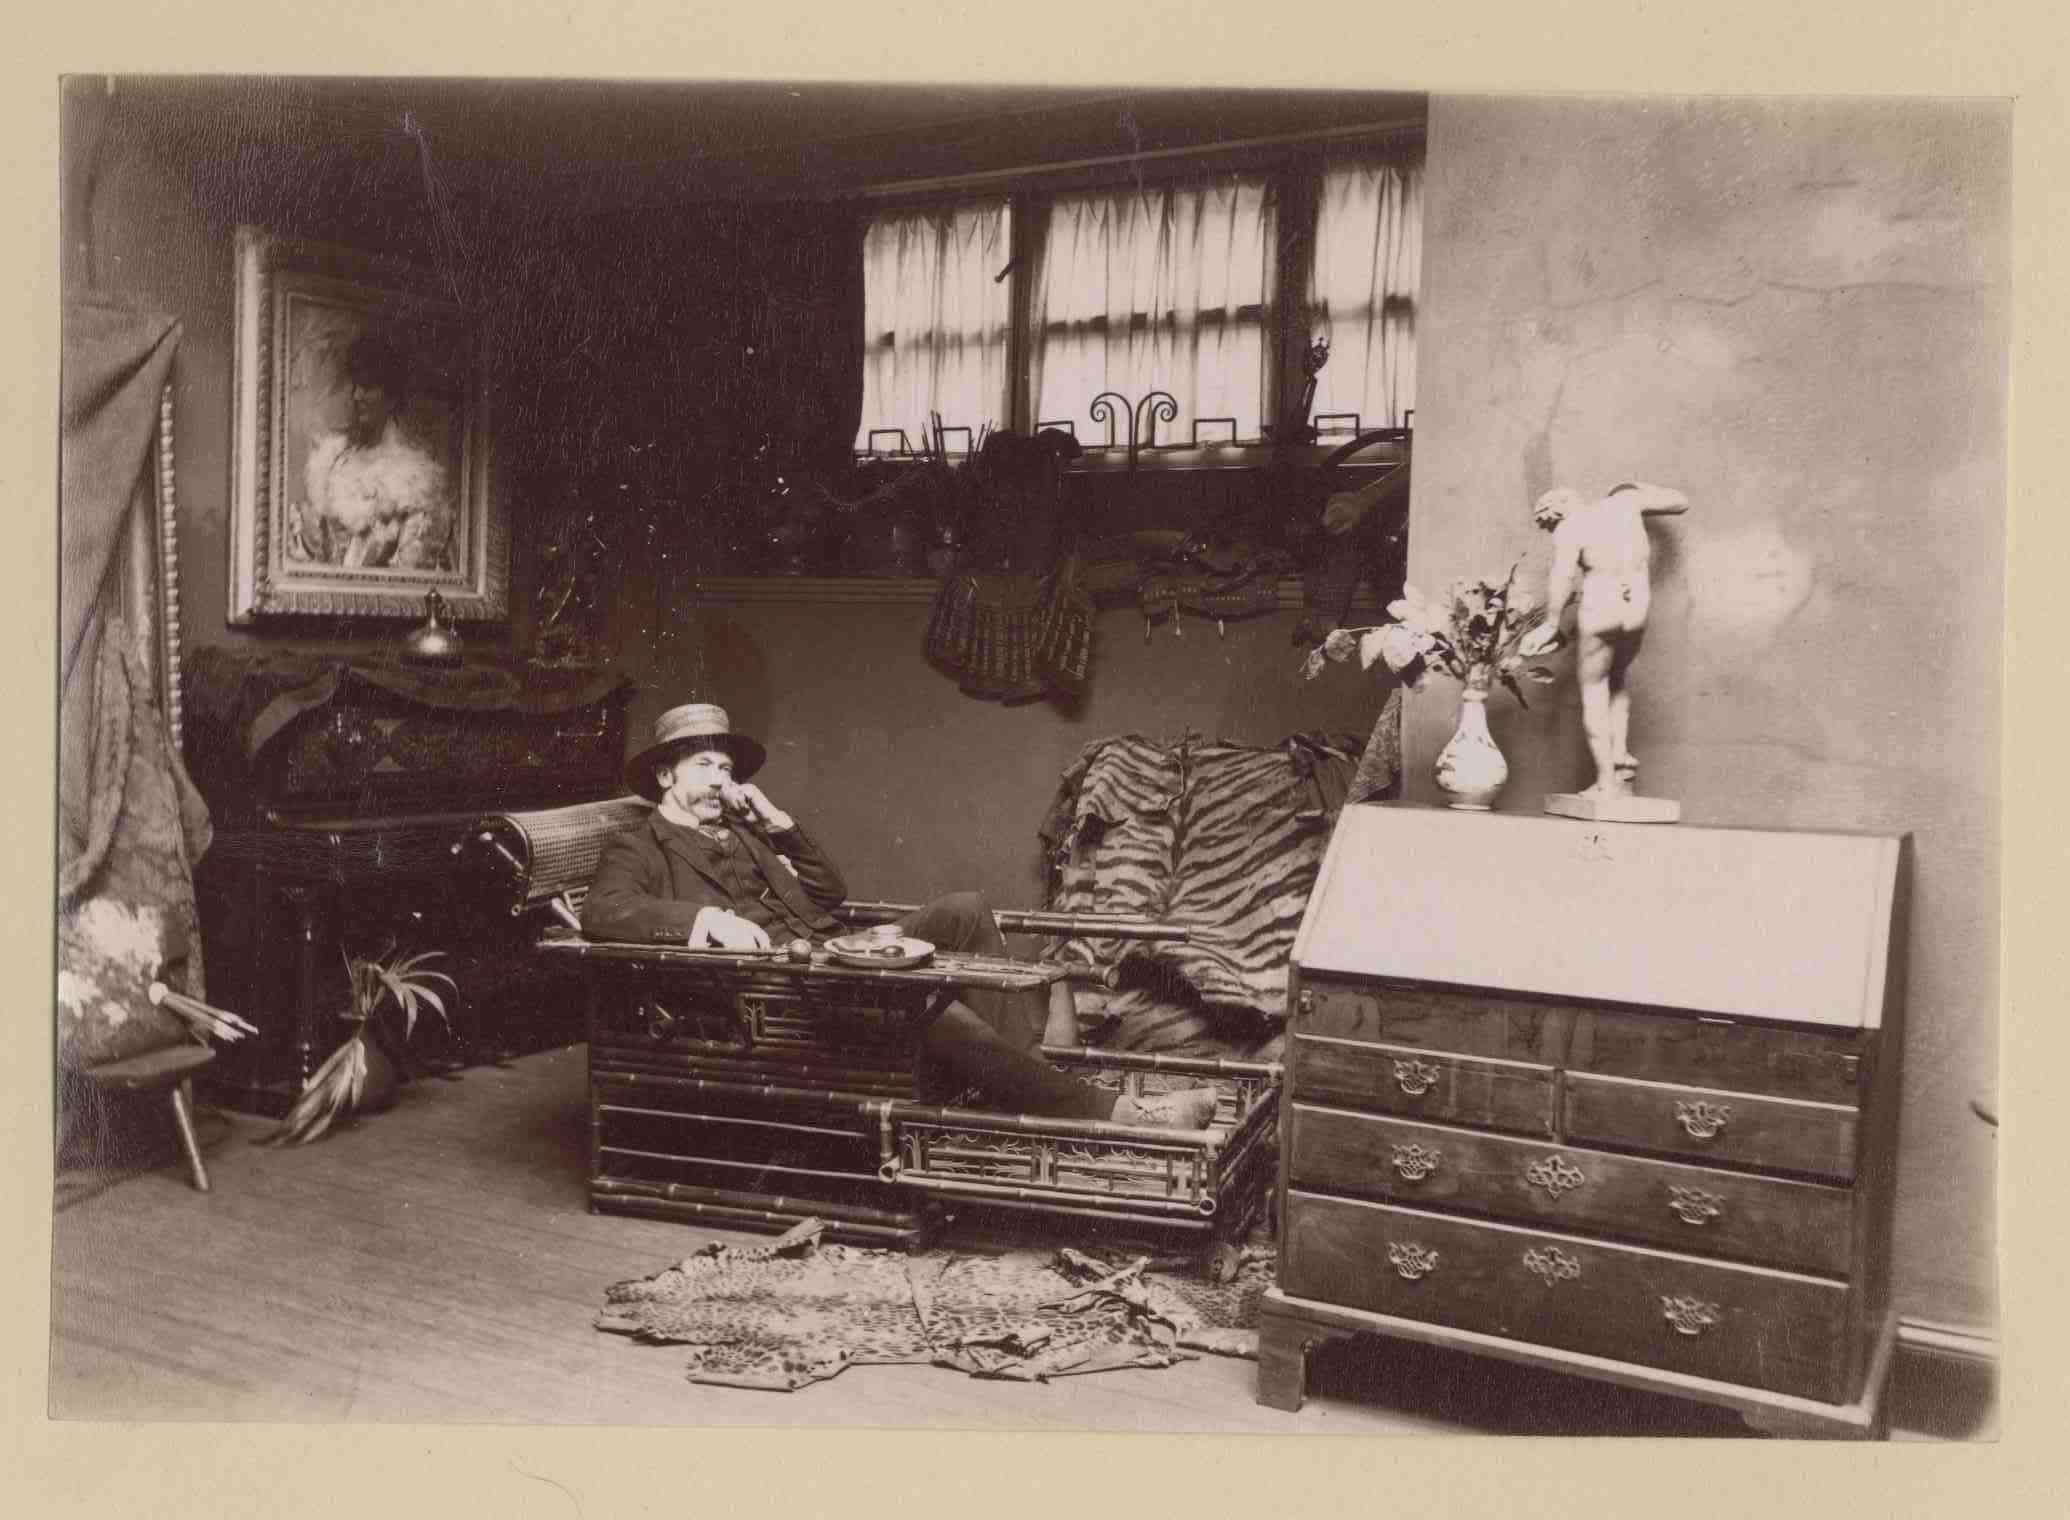 Lauriston photograph album – artist’s studio with man reclining on a travelling couch